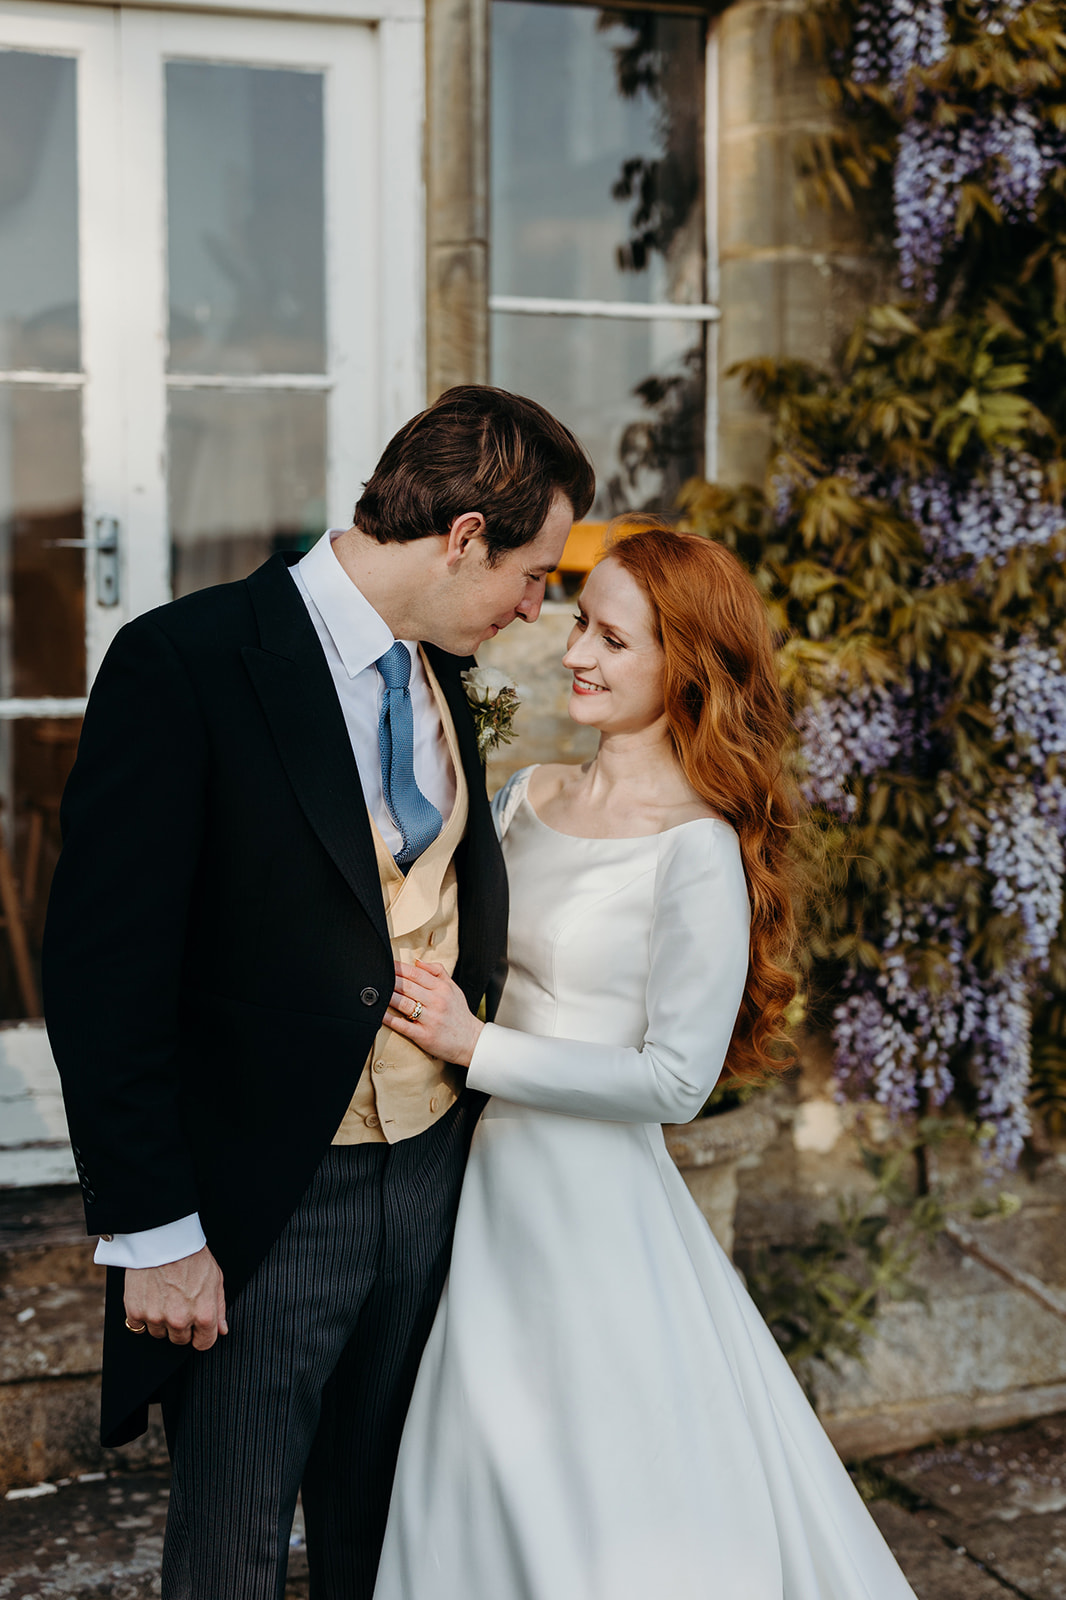 Capturing the couple against the dramatic backdrop of the Buckhurst Park mansion.